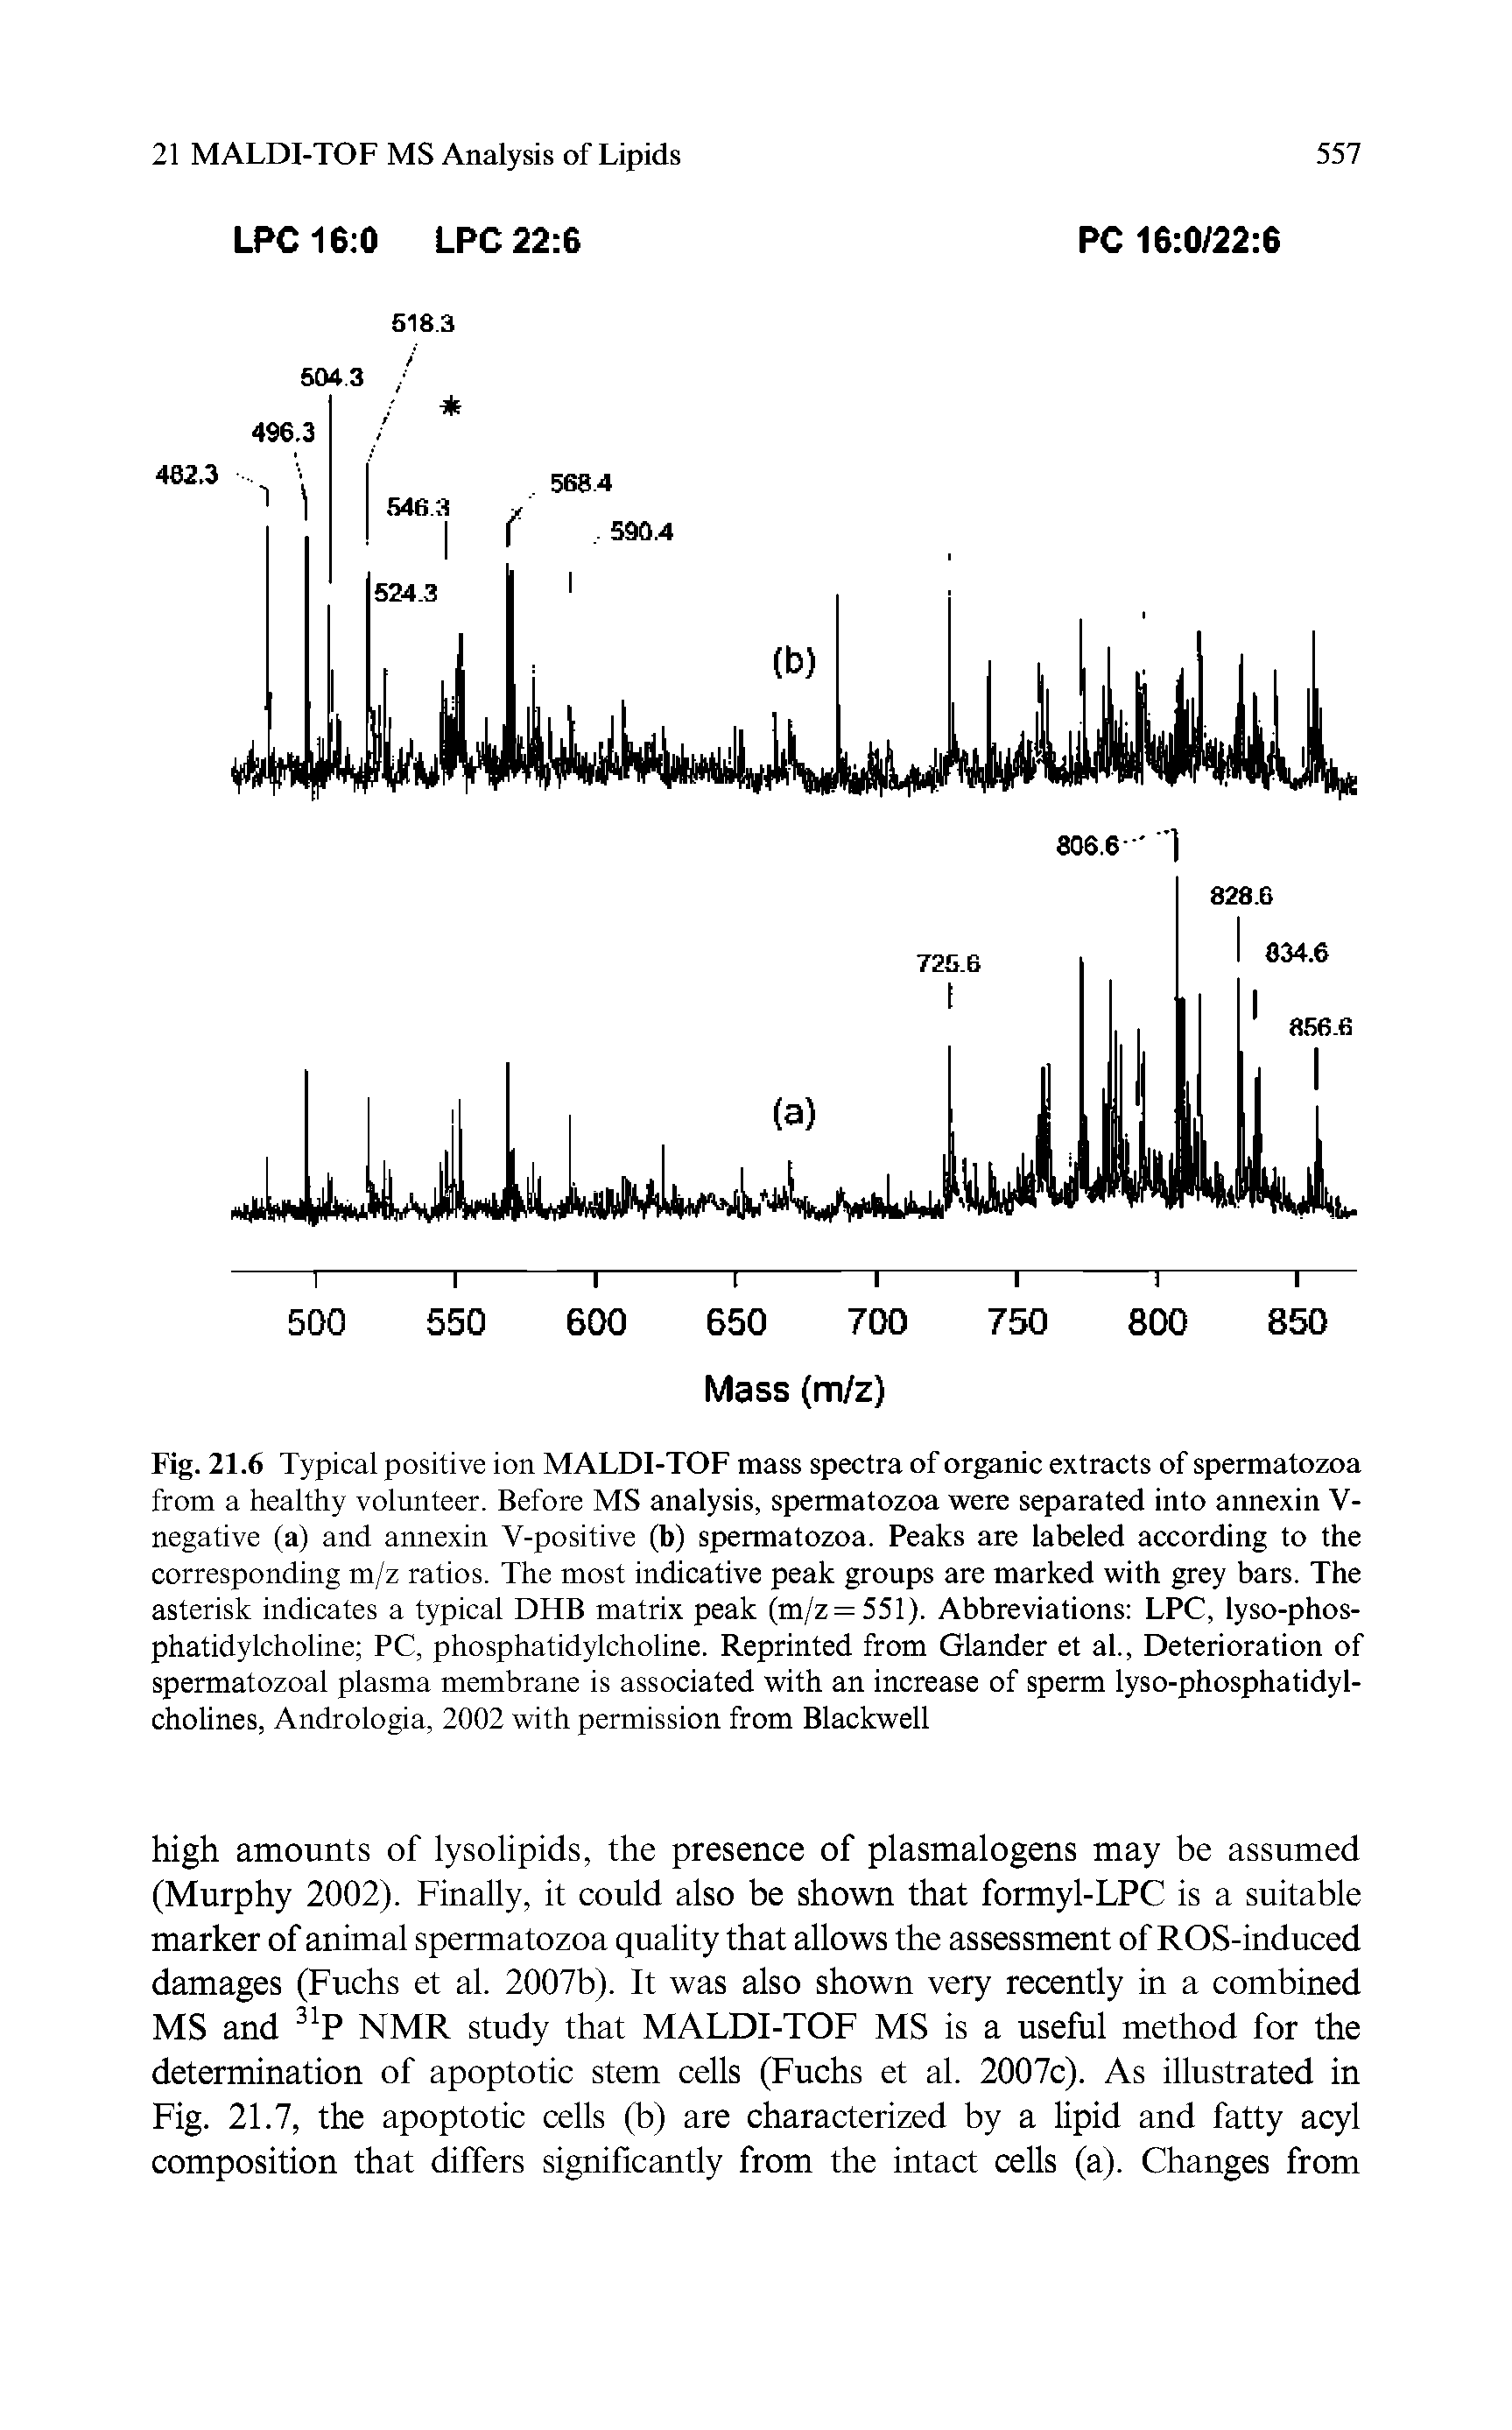 Fig. 21.6 Typical positive ion MALDI-TOF mass spectra of organic extracts of spermatozoa from a healthy volunteer. Before MS analysis, spermatozoa were separated into annexin V-negative (a) and annexin V-positive (b) spermatozoa. Peaks are labeled according to the corresponding m/z ratios. The most indicative peak groups are marked with grey bars. The asterisk indicates a typical DHB matrix peak (m/z = 551). Abbreviations LPC, lyso-phos-phatidylcholine PC, phosphatidylcholine. Reprinted from Glander et al.. Deterioration of spermatozoal plasma membrane is associated with an increase of sperm lyso-phosphatidyl-cholines, Andrologia, 2002 with permission from Blackwell...